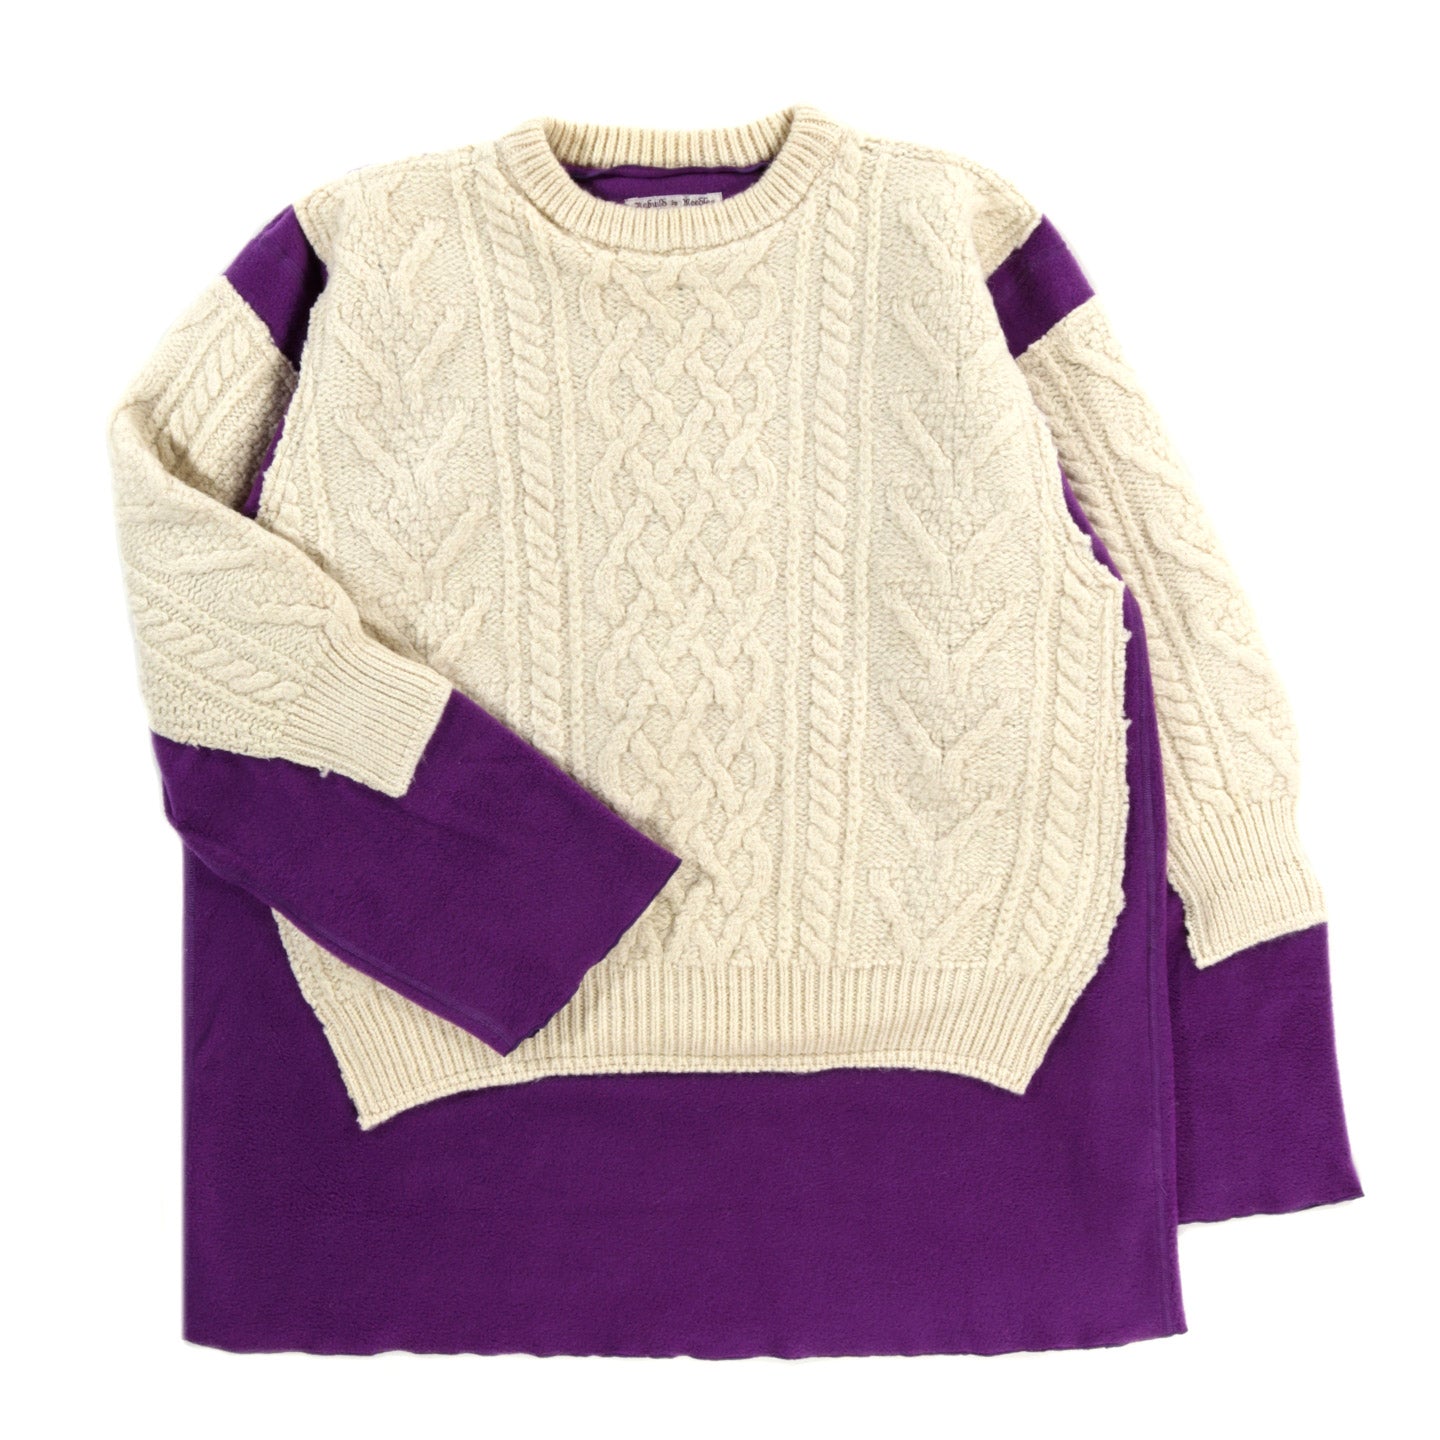 REBUILD BY NEEDLES FISHERMAN SWEATER NATURAL / PURPLE - L (A)